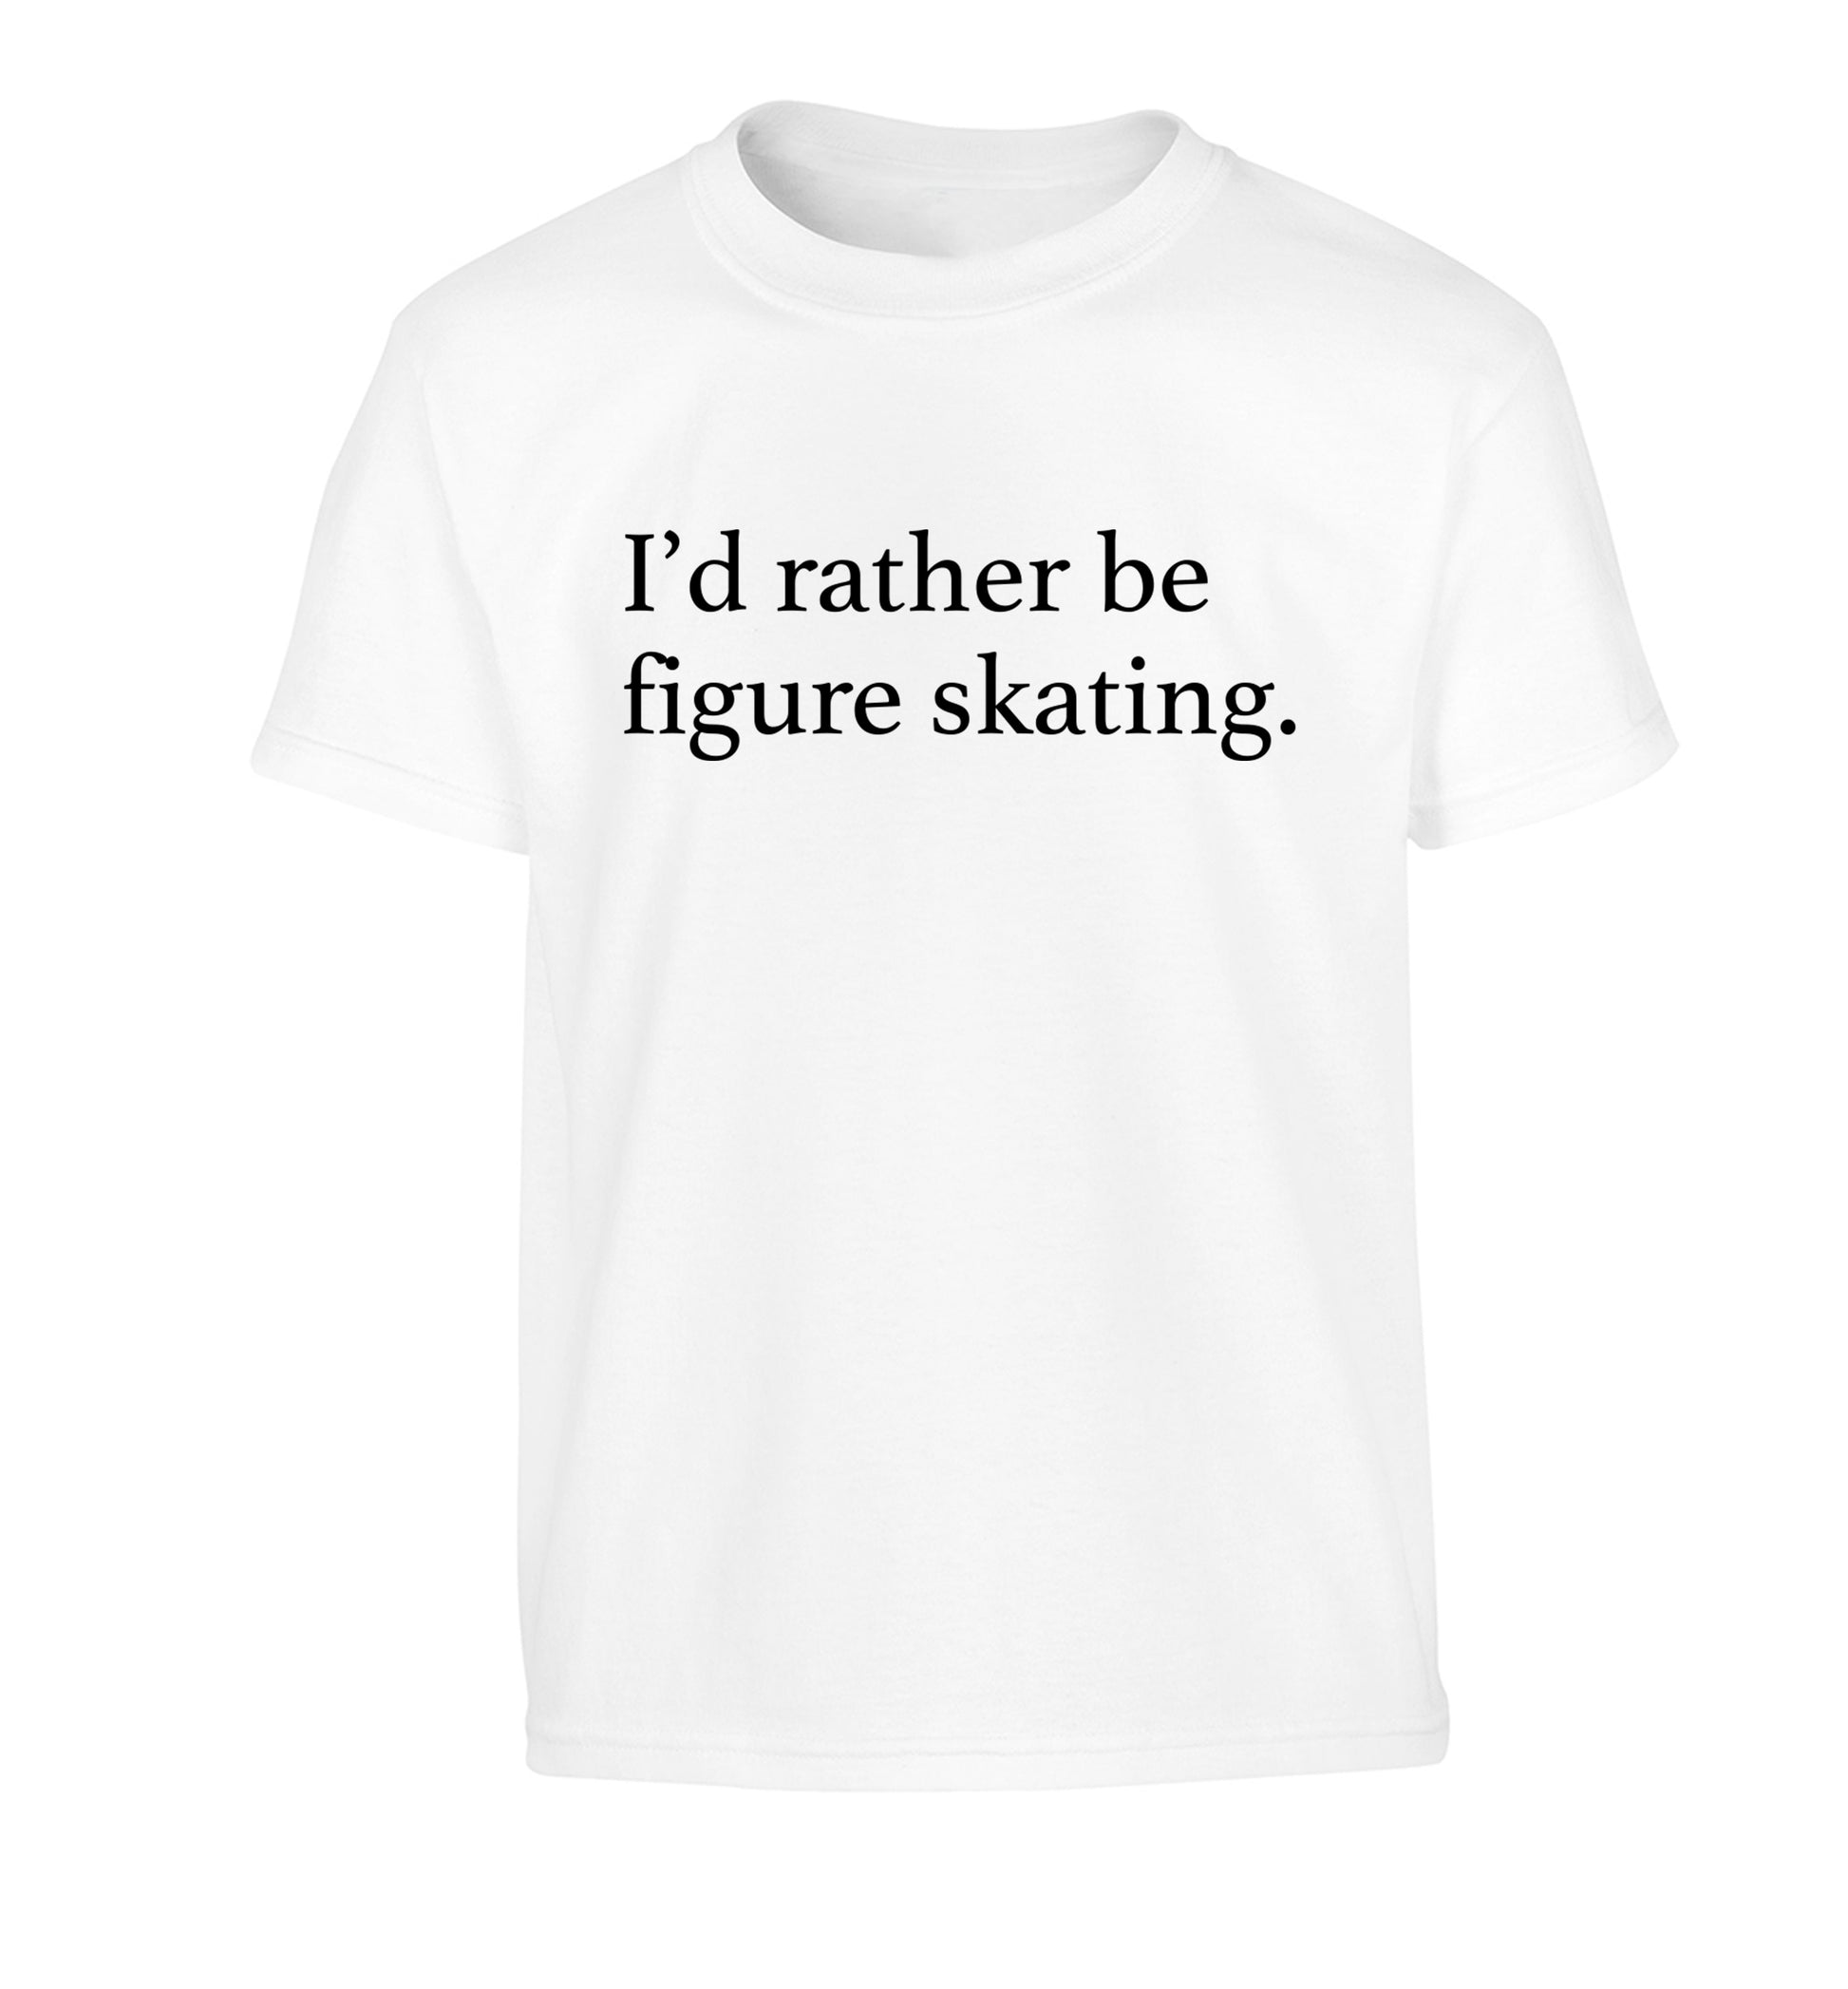 I'd rather be figure skating Children's white Tshirt 12-14 Years